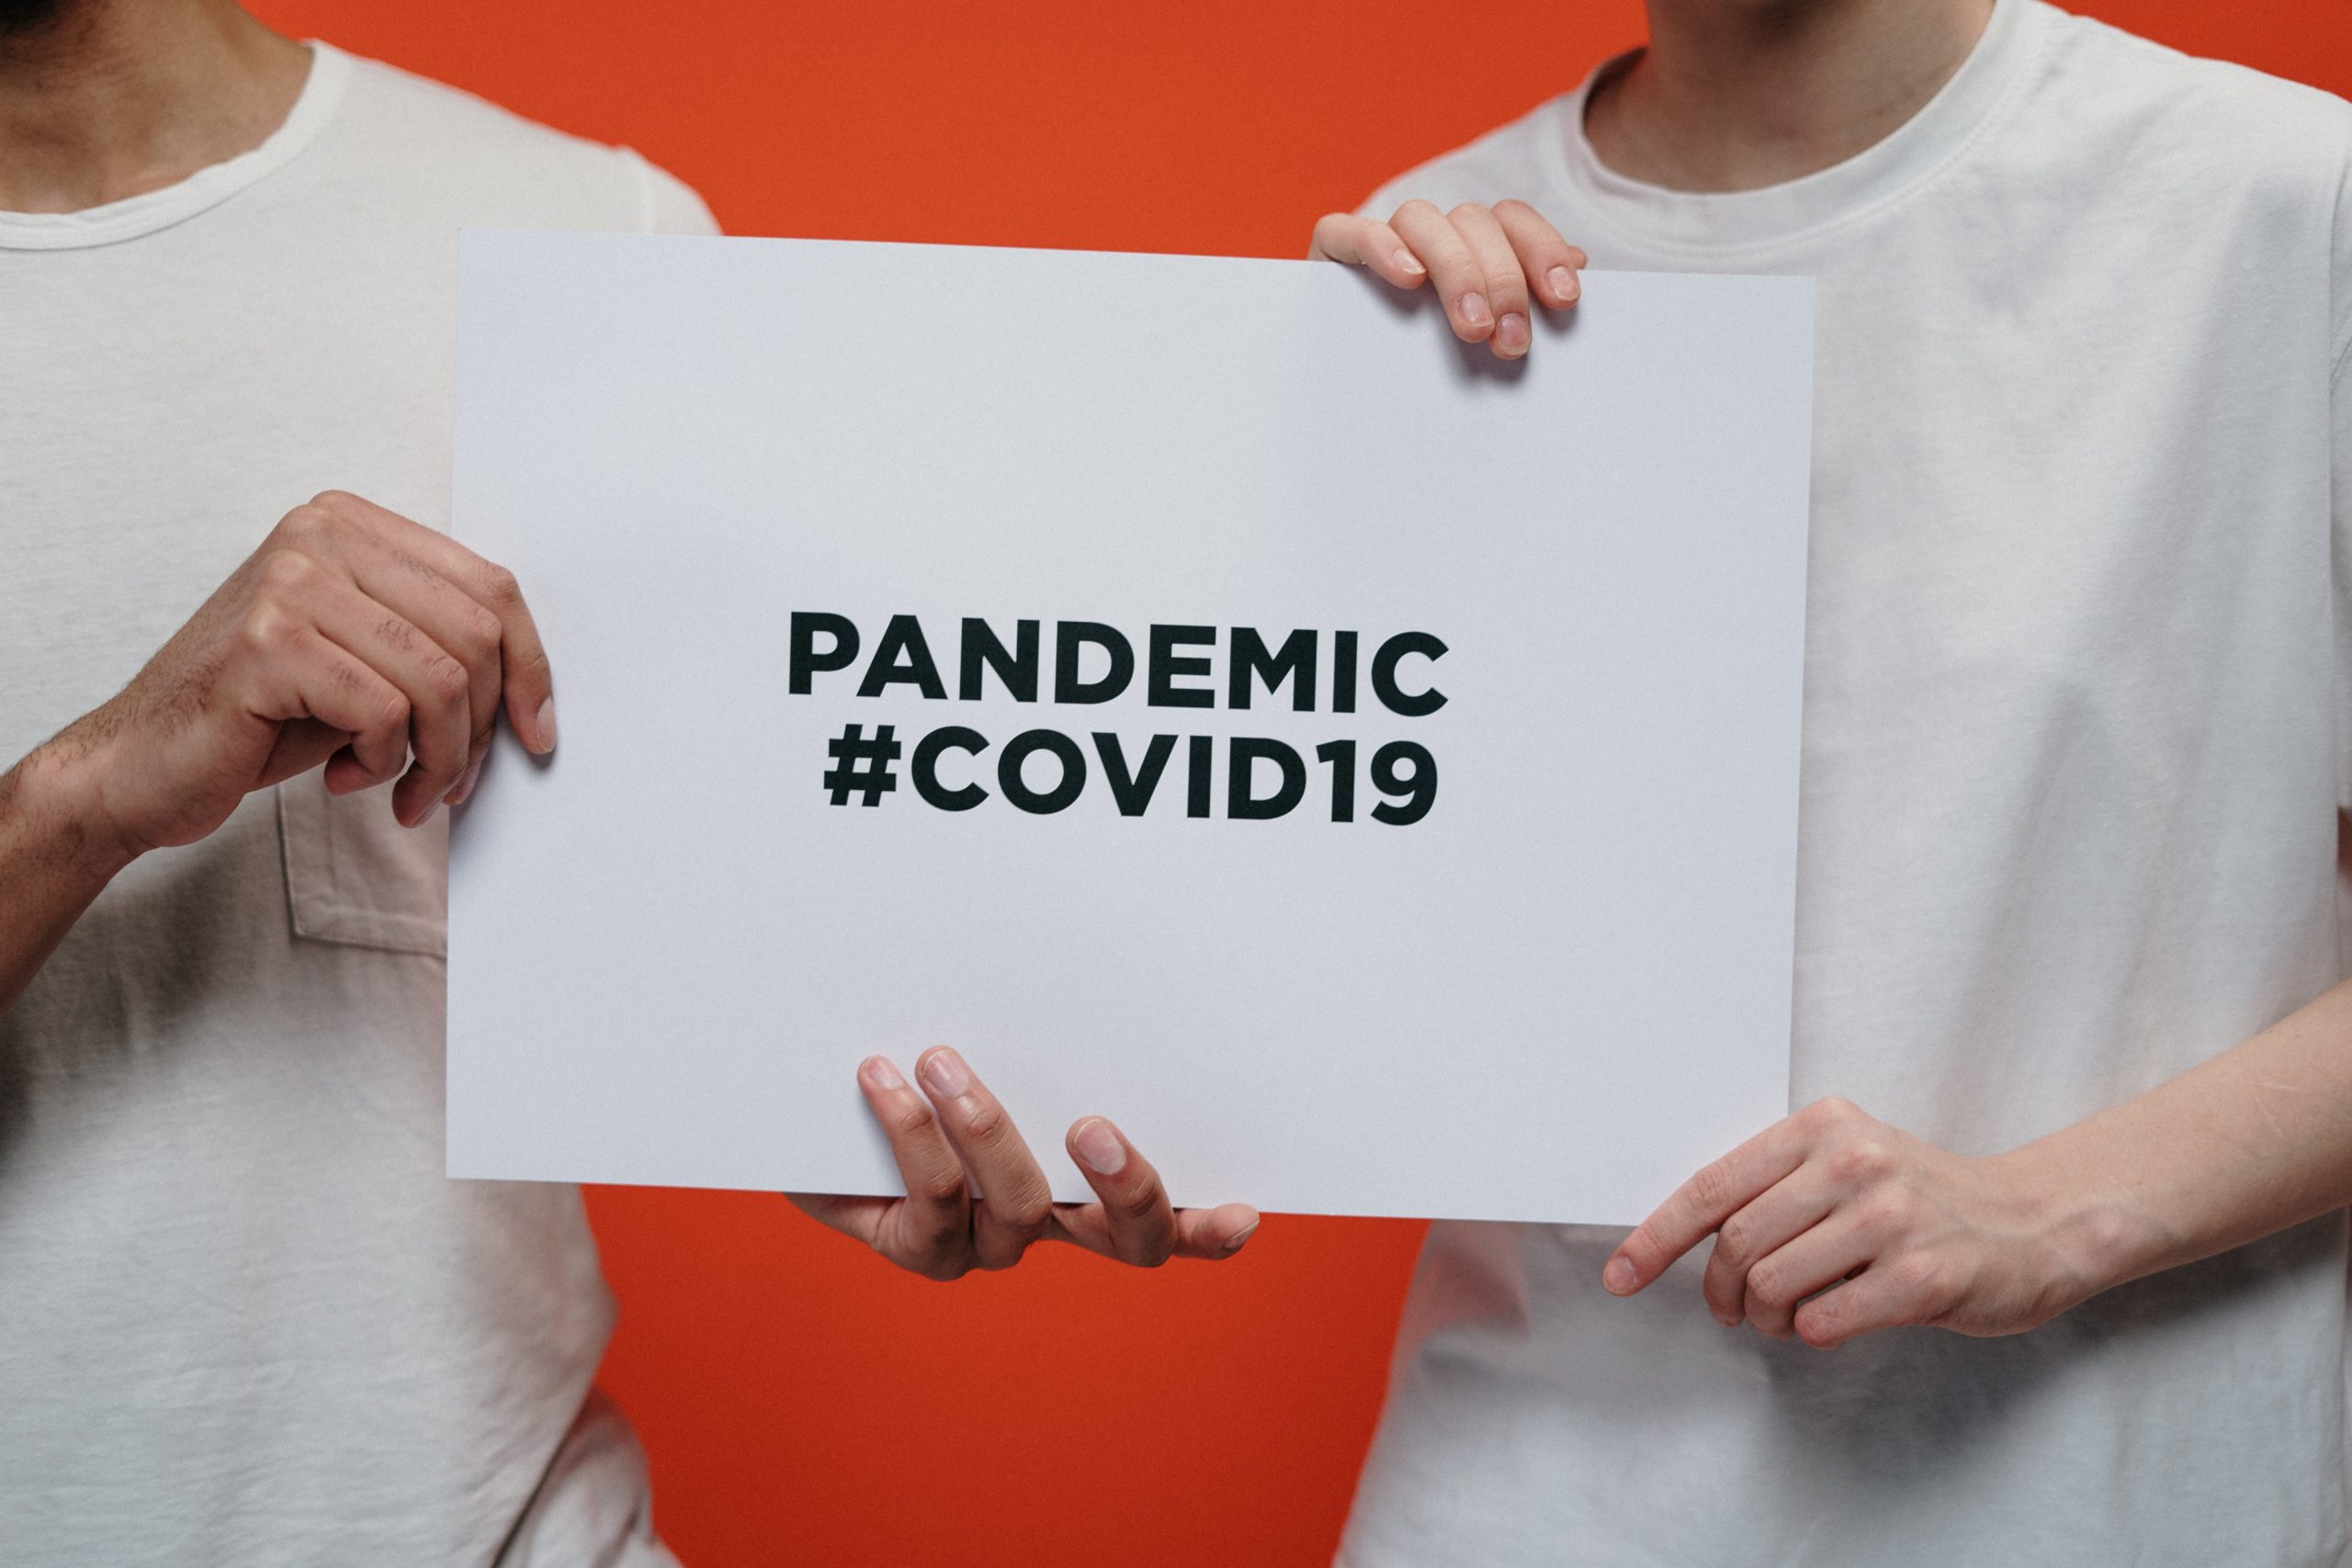 Two people in white T0shirts hold up a sign reading: "PANDEMIC #COVID19"